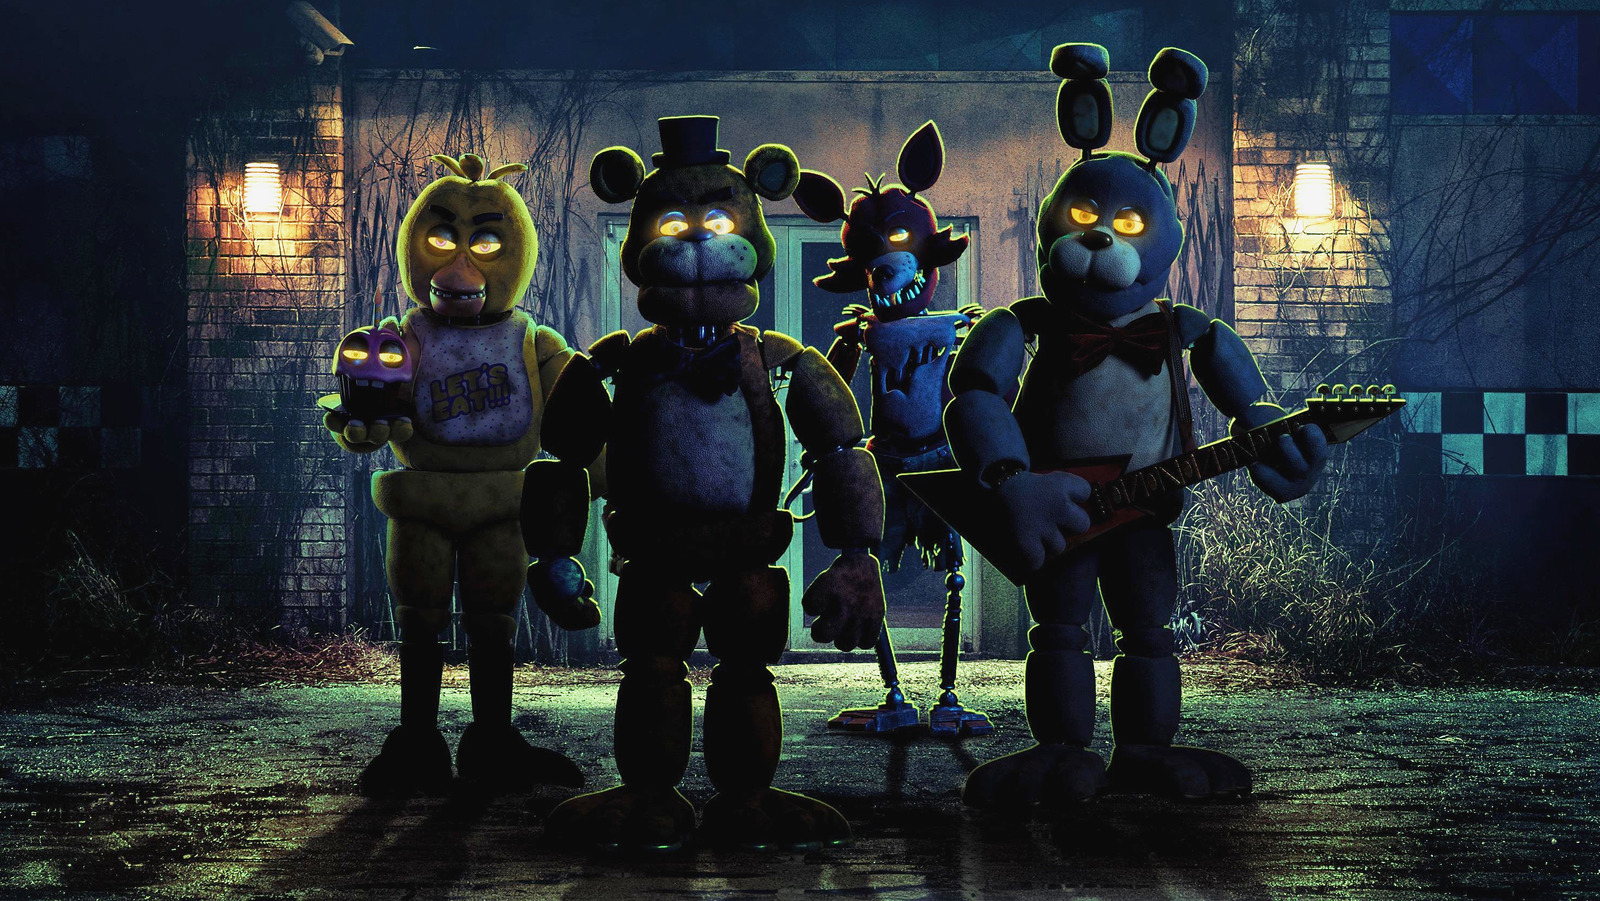 What would you like to see in the next Fnaf movie, or what do you